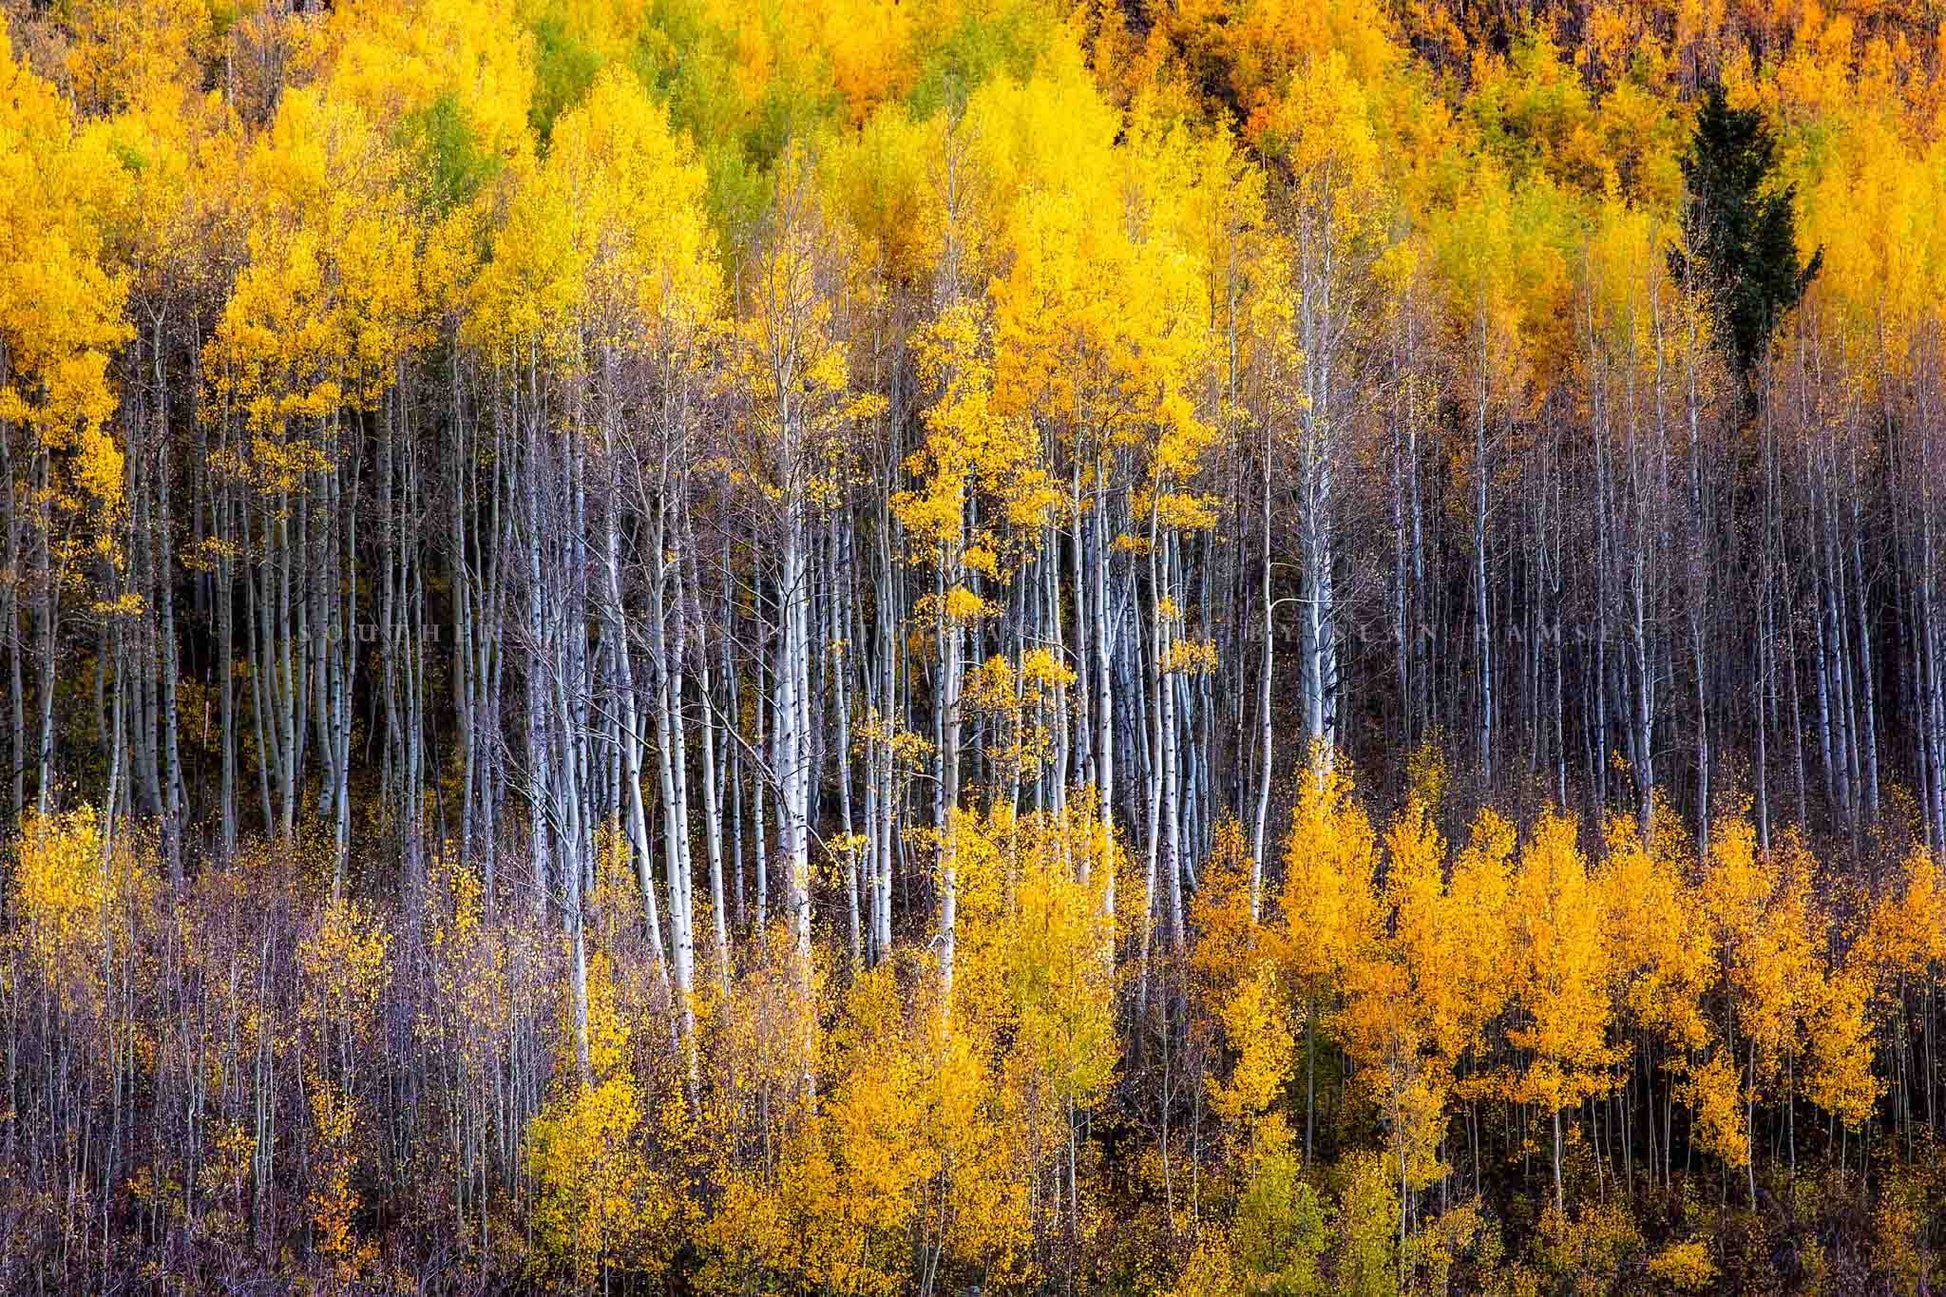 Nature photography print of golden aspen trees with fall color appearing as a reflection on a side of a mountain on an autumn day at the Maroon Bells in Colorado by Sean Ramsey of Southern Plains Photography.